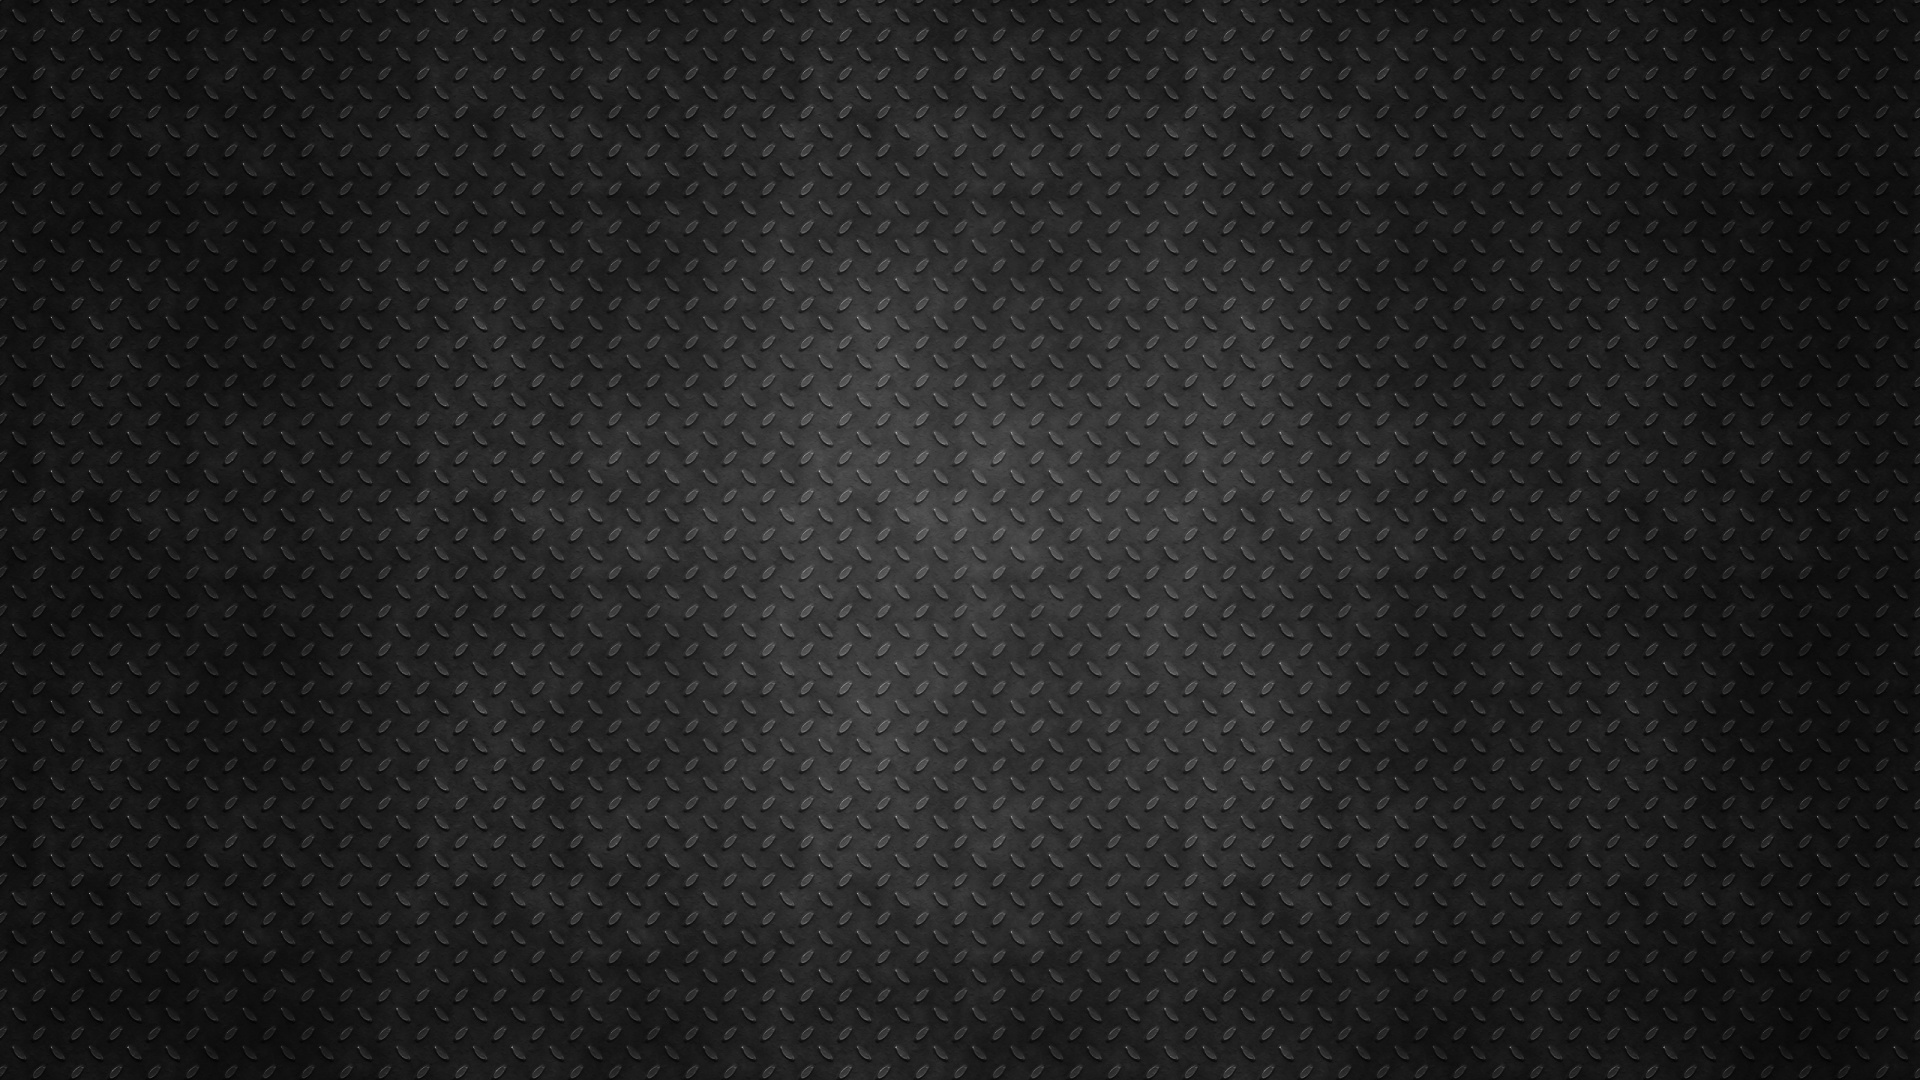 Black and White Polka Dot Textile. Wallpaper in 1920x1080 Resolution